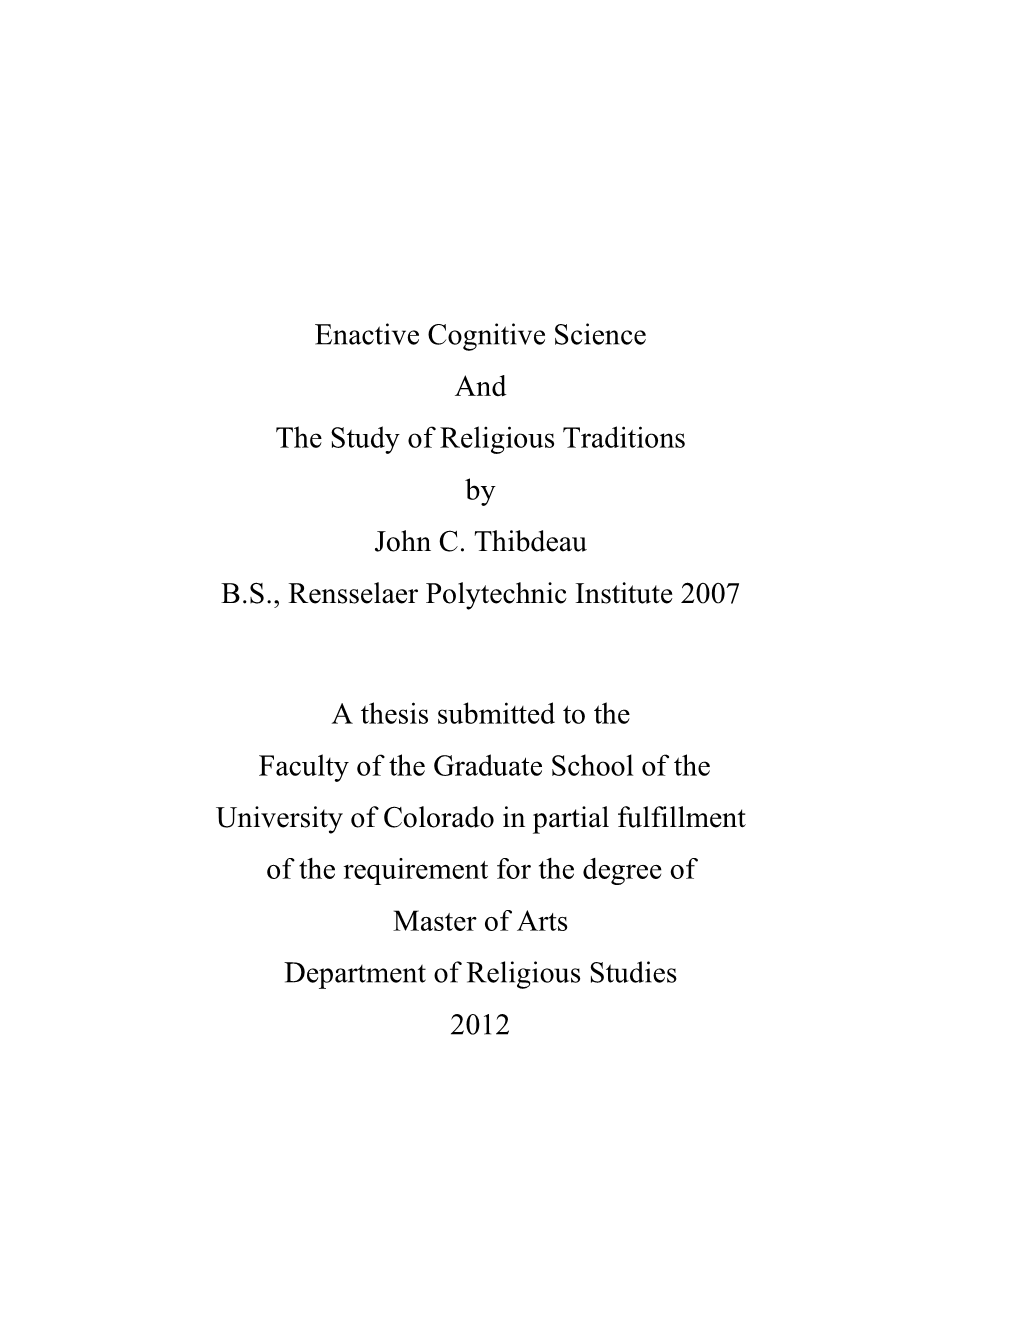 Enactive Cognitive Science and the Study of Religious Traditions by John C